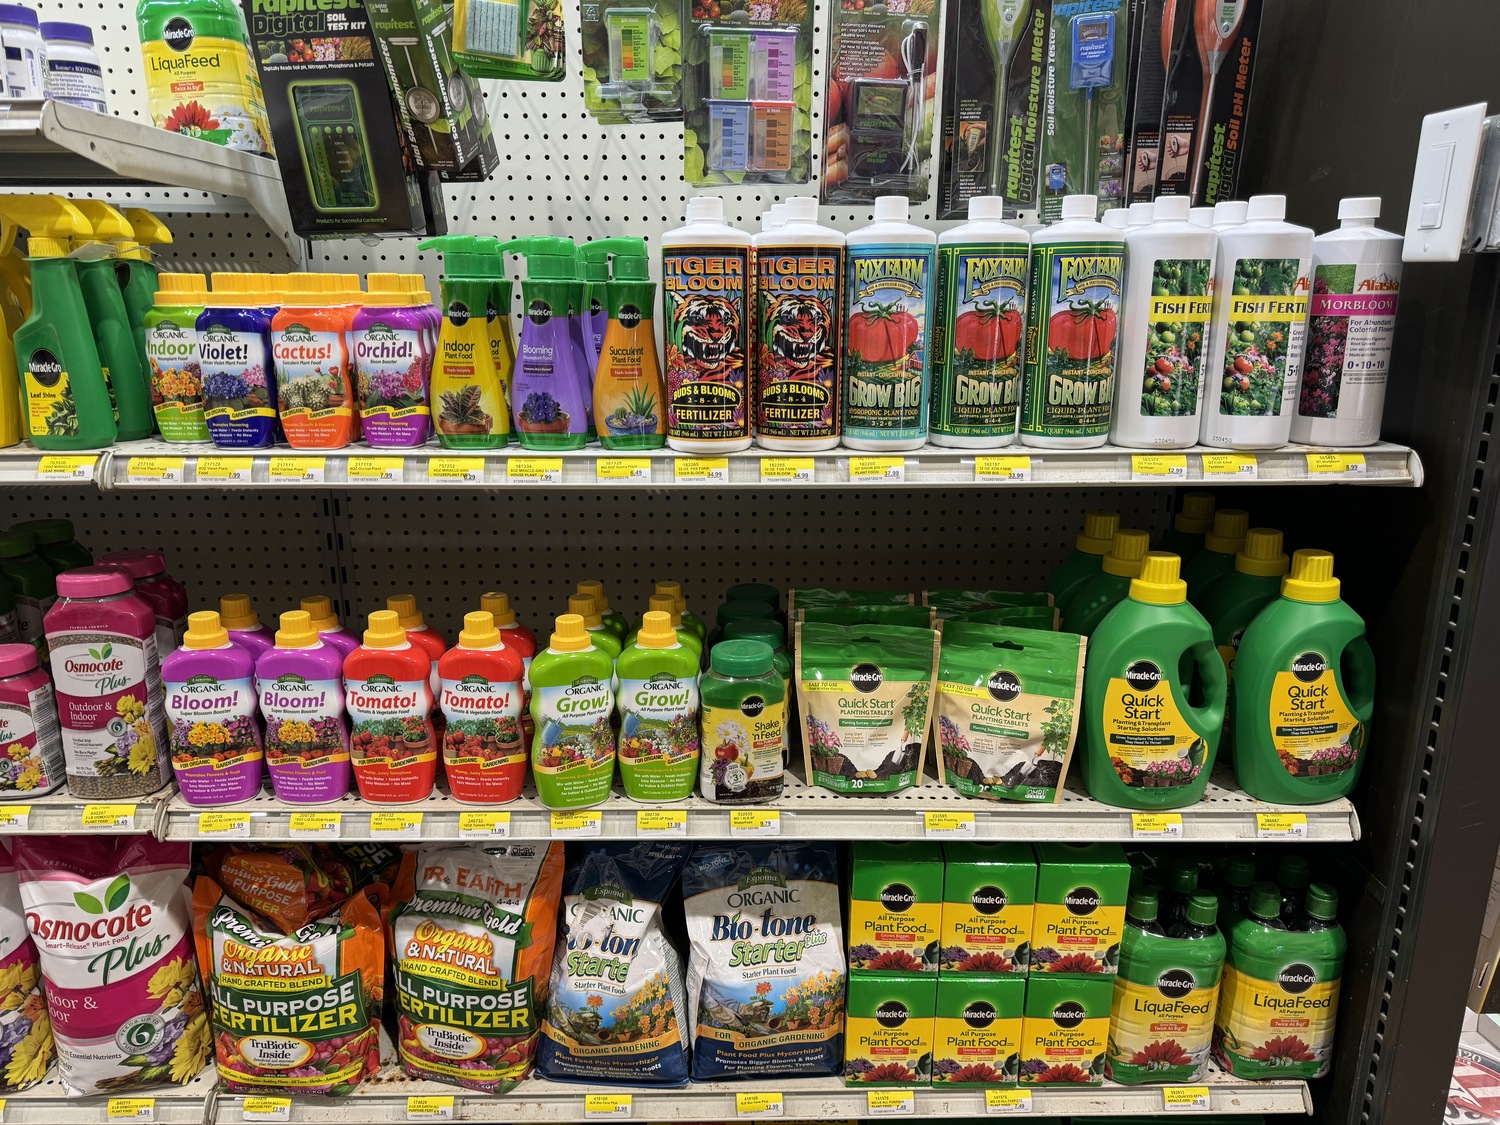 Just one of the three 20-foot-longshelves of fertilizers at a garden center. Each container must state the formulation (N-P-K) of fertilizer it contains, but it’s not always easy to find. Do you know which products in this photo are chemical based and which are organic? Usually the word 